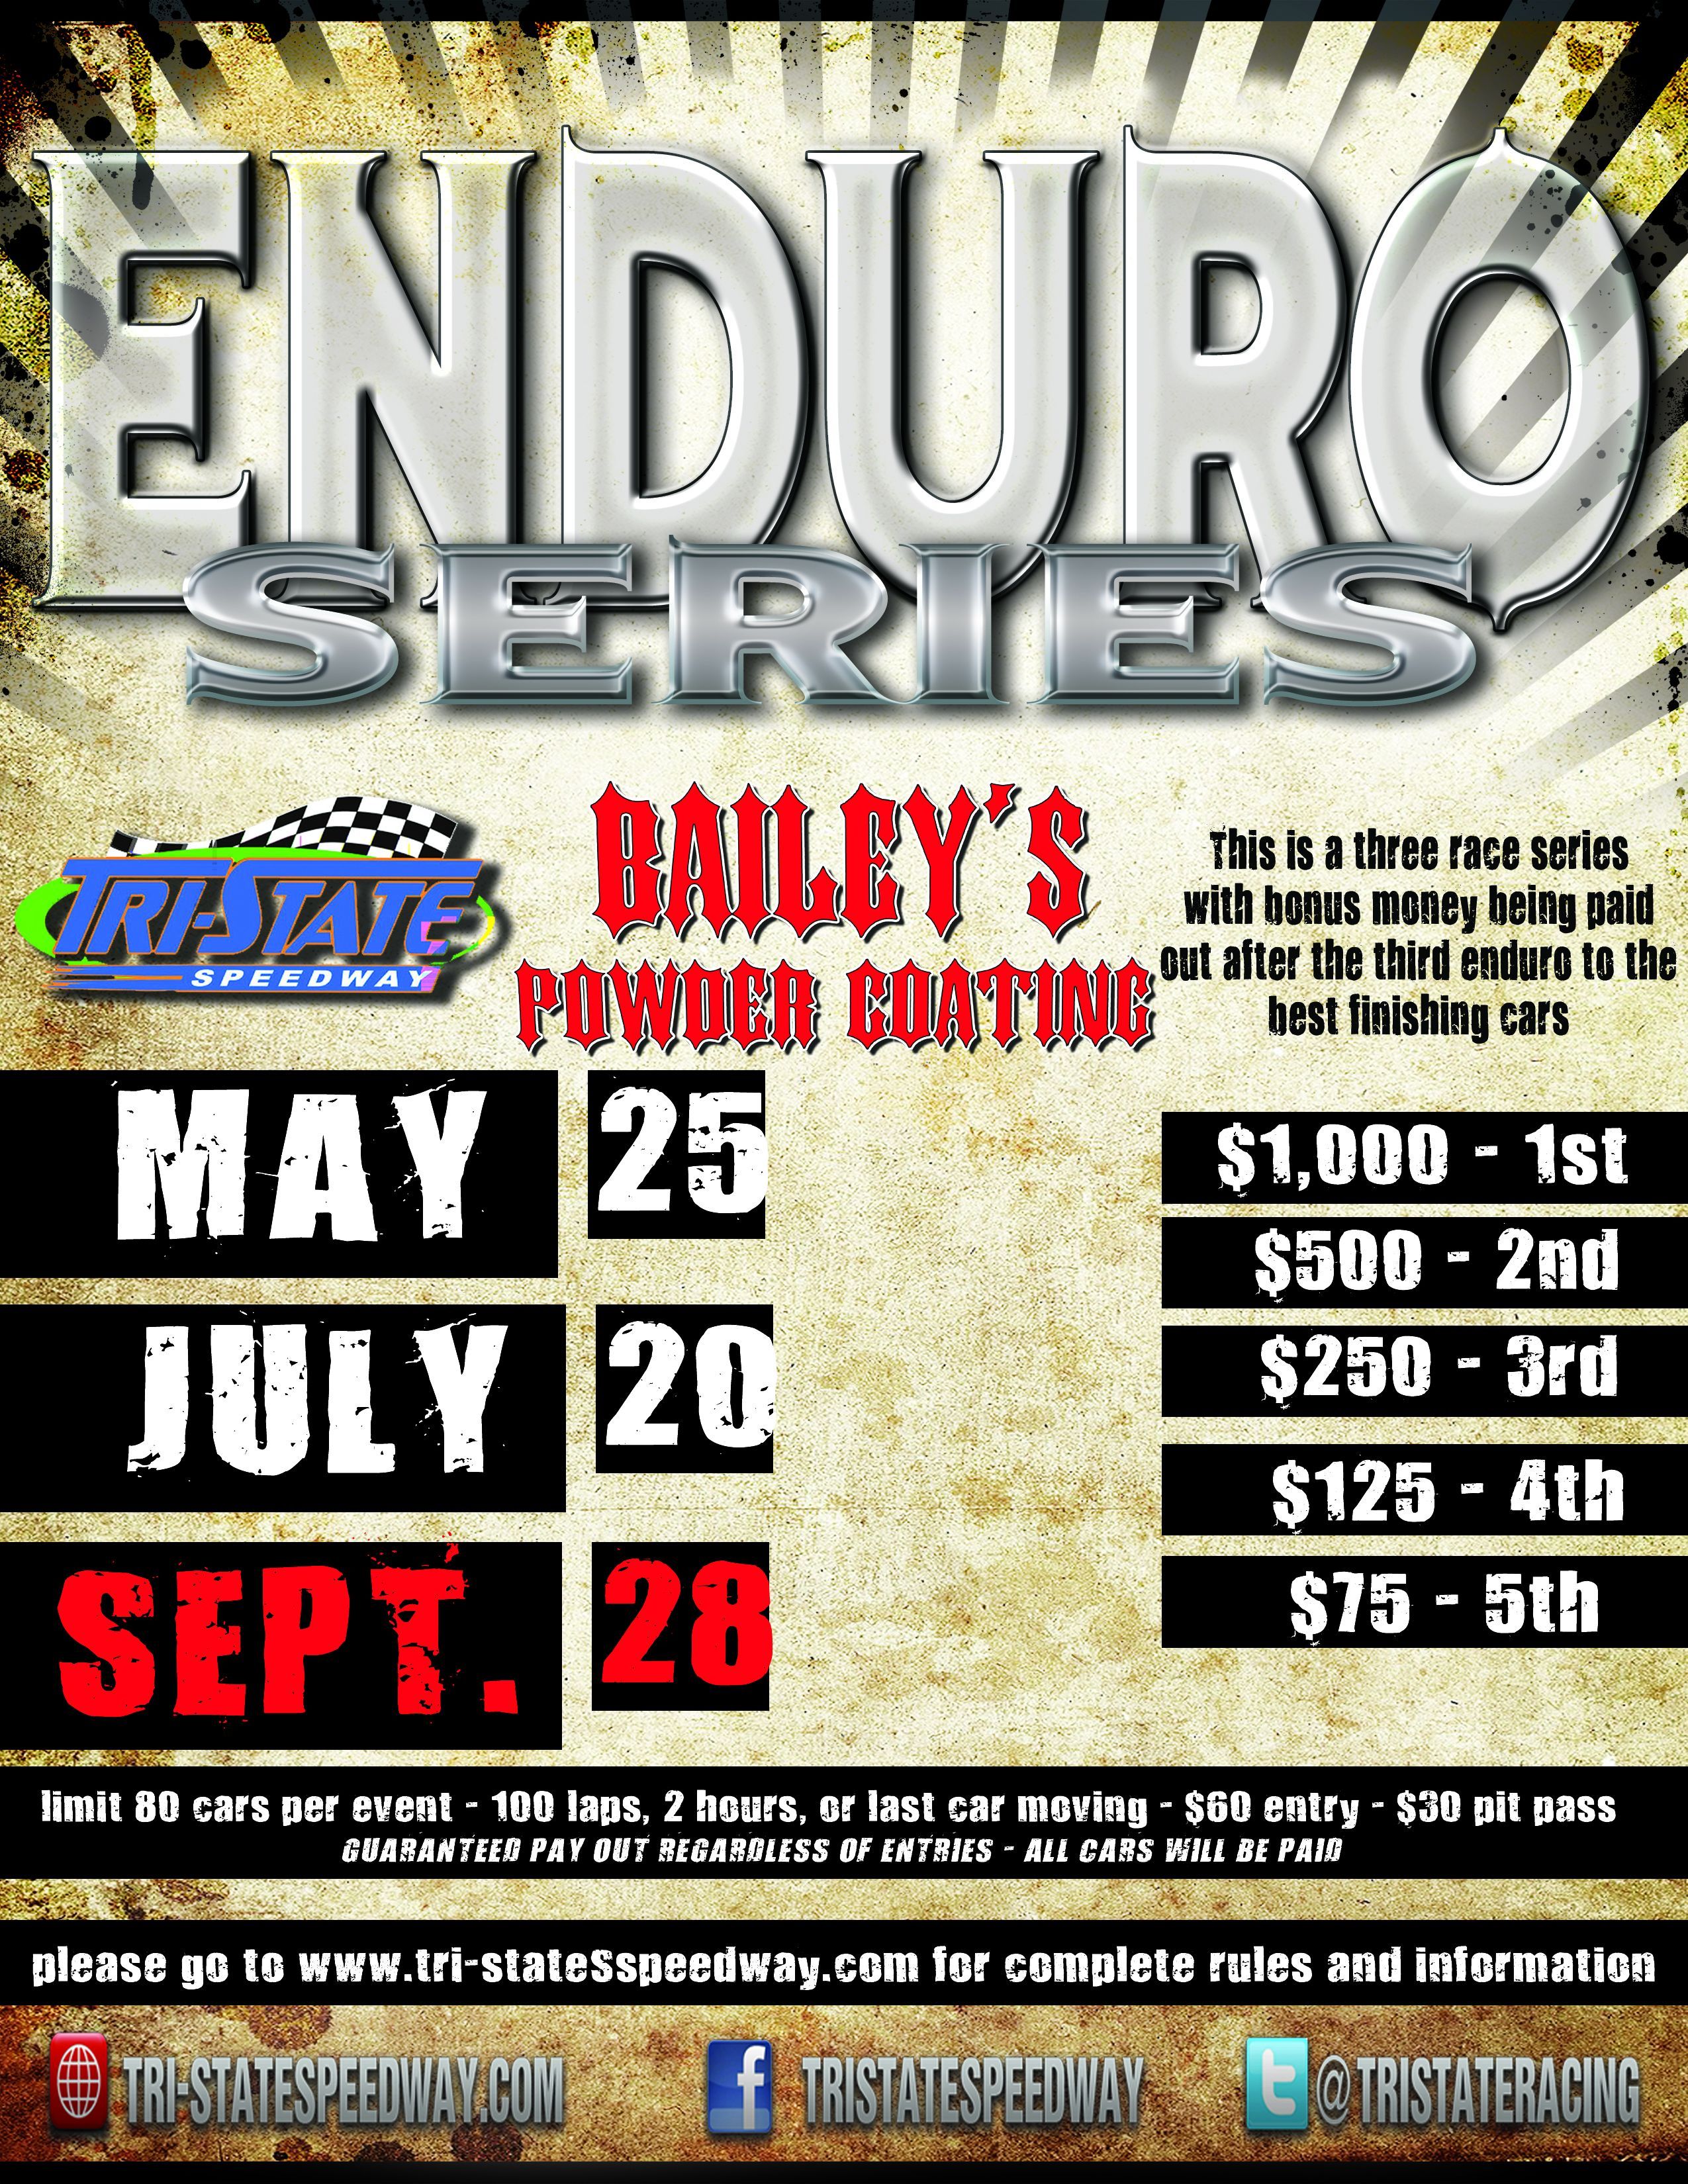 It's time for the 43rd Annual Points Championship and Enduro Series finale'!